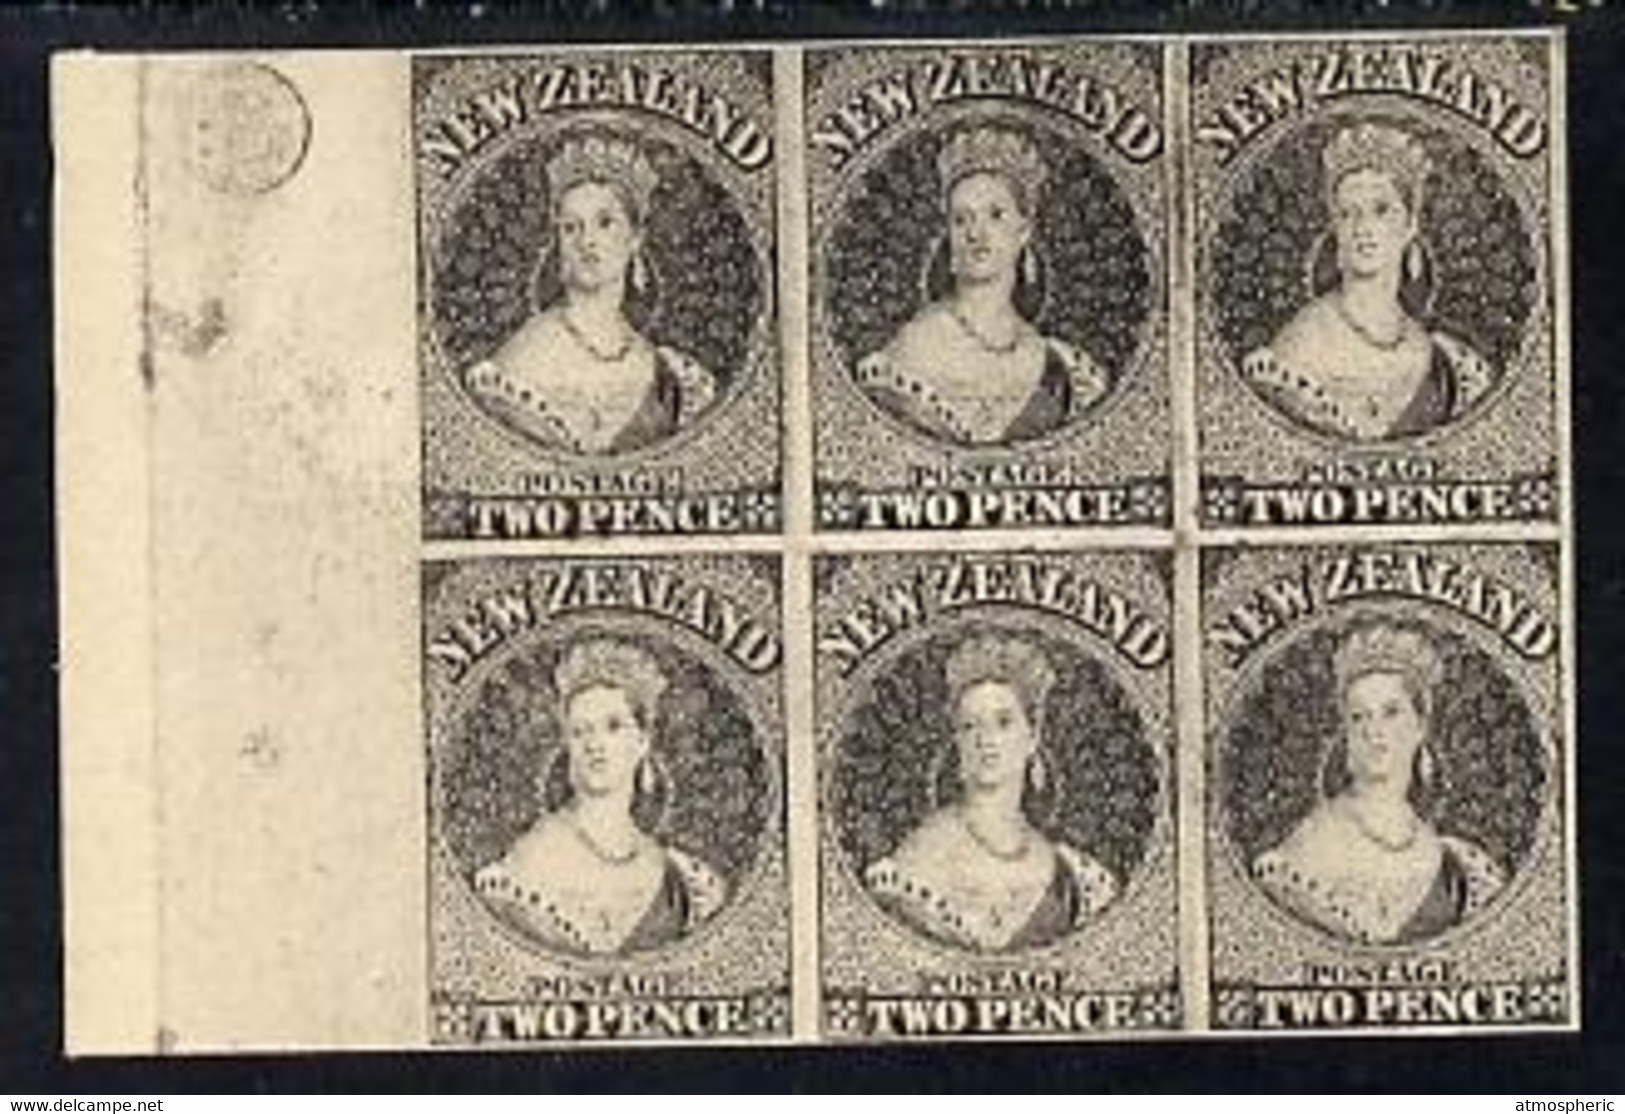 New Zealand 1855 Chalon Head 2d Hausberg's Imperf Proof Block Of 6 In Black On White Card, Very Fine - Ungebraucht